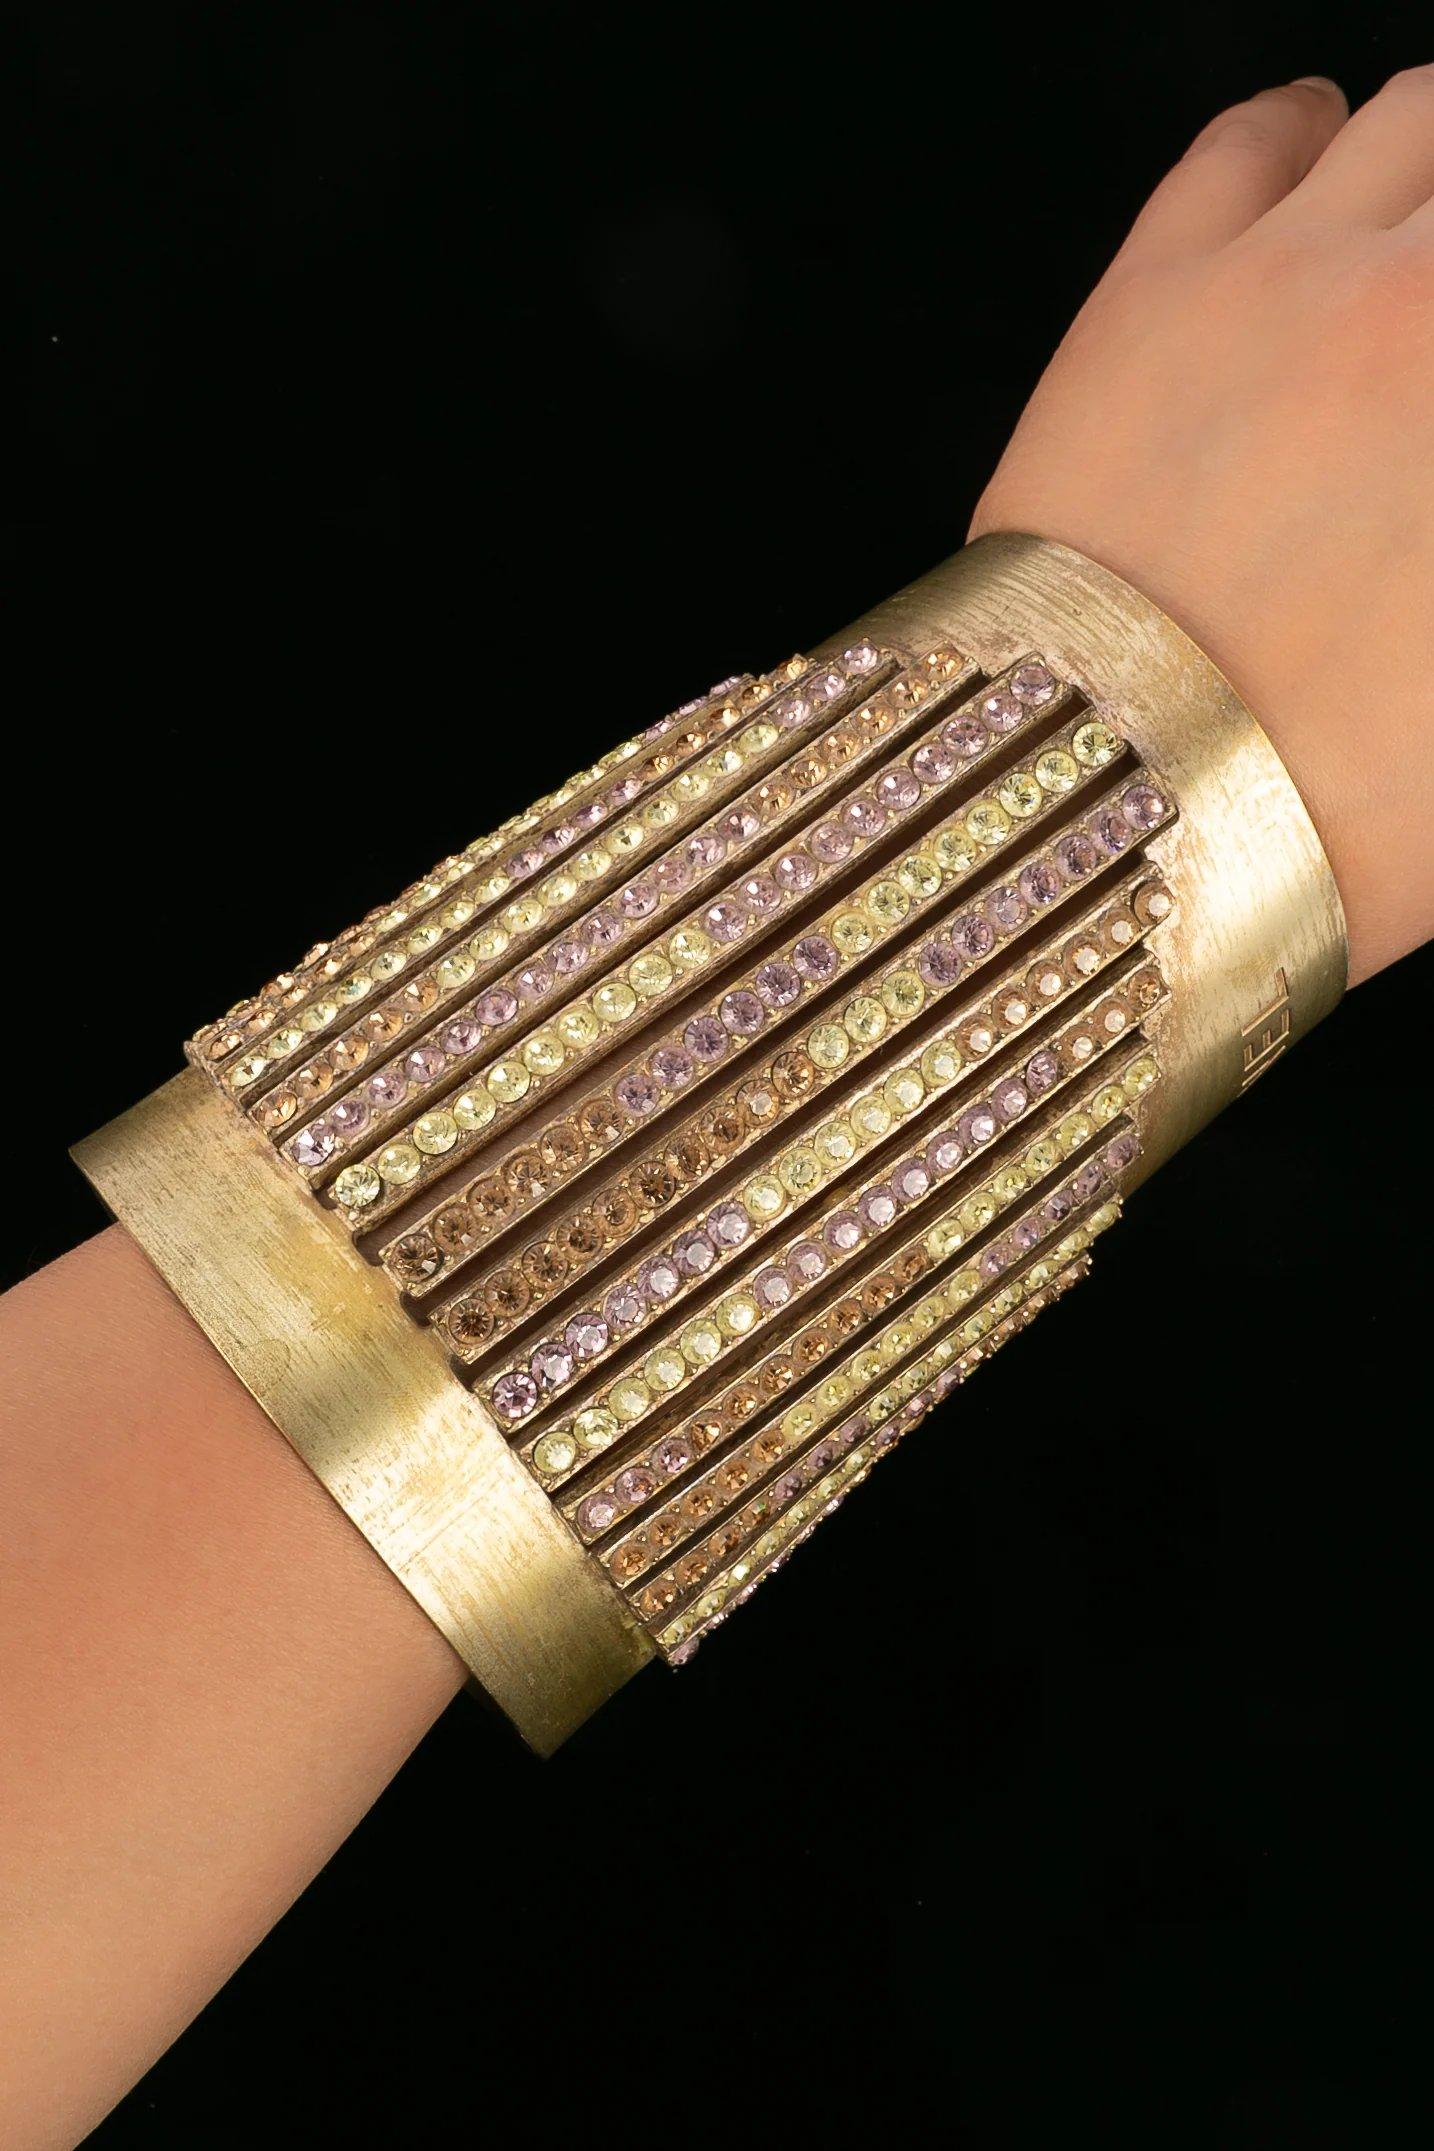 Chanel Cuff Bracelet in Golden Metal Sleeve Paved with Multicolored Rhinestones For Sale 1